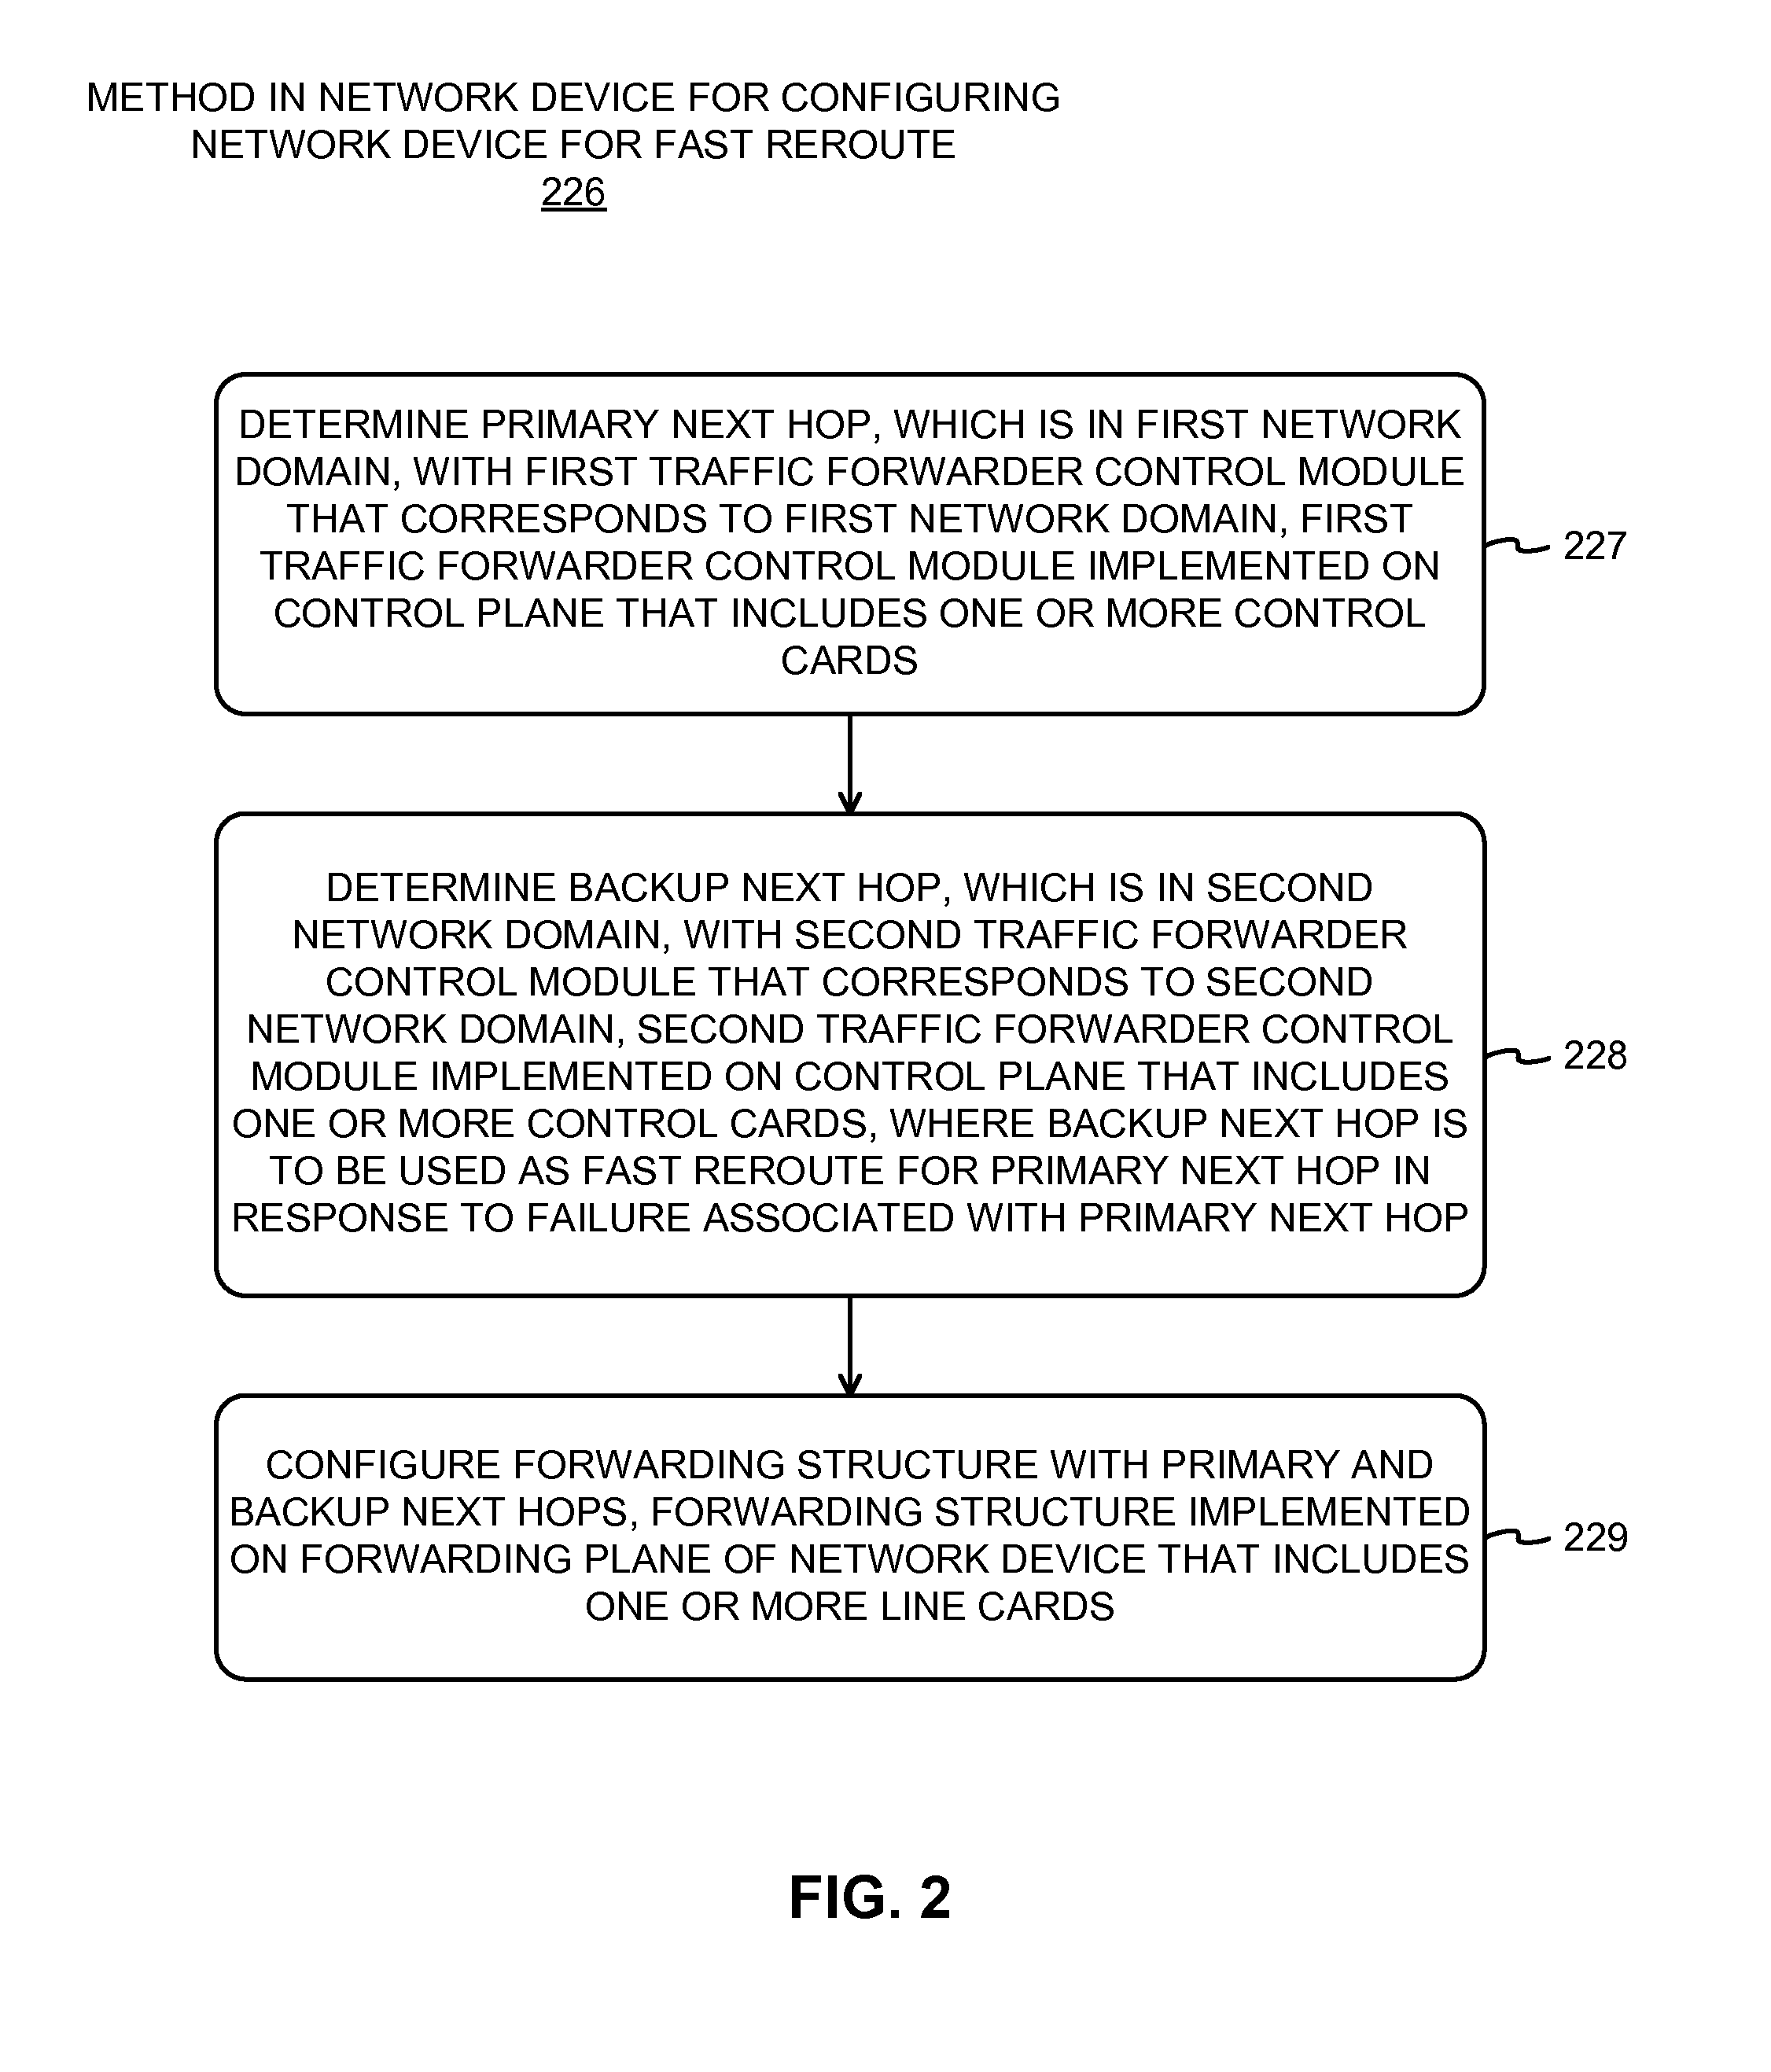 Inter-domain fast reroute methods and network devices